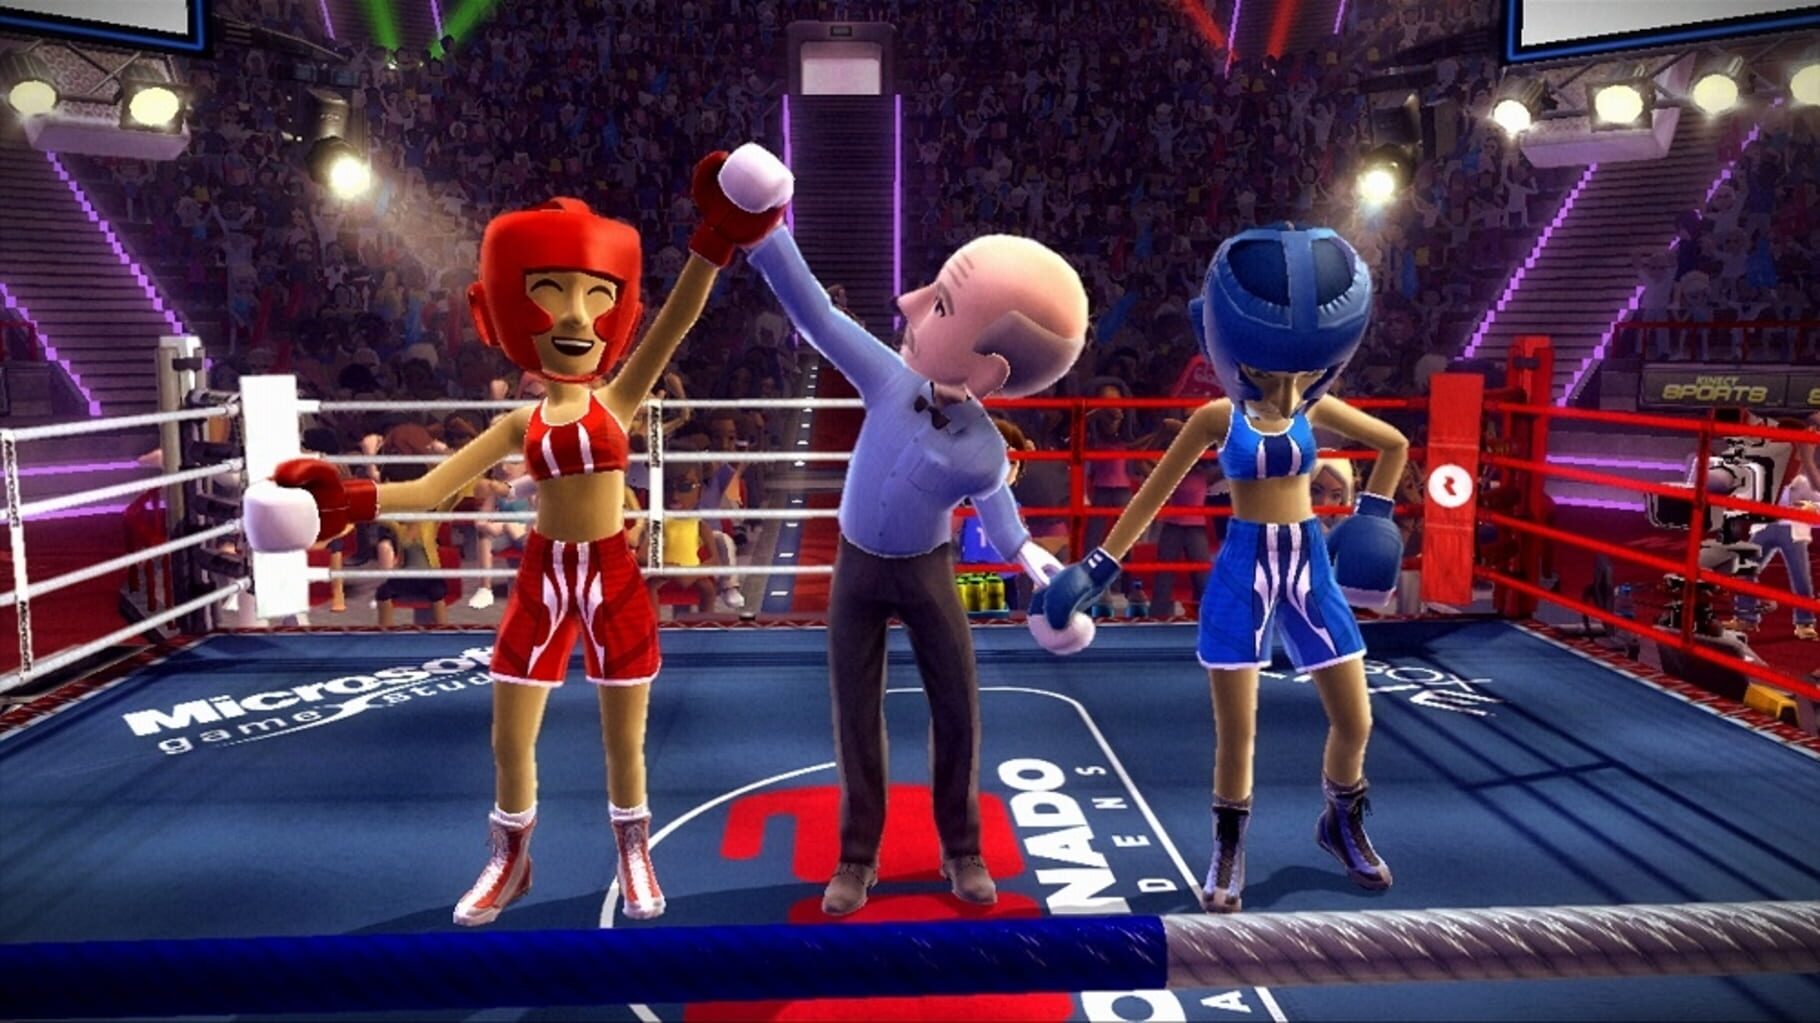 Untilited boxing game. Kinect Sports Xbox 360. Kinect Sports Xbox 360 коробка. Kinect Sports 1. Xbox 360 Kinect Sports 3.